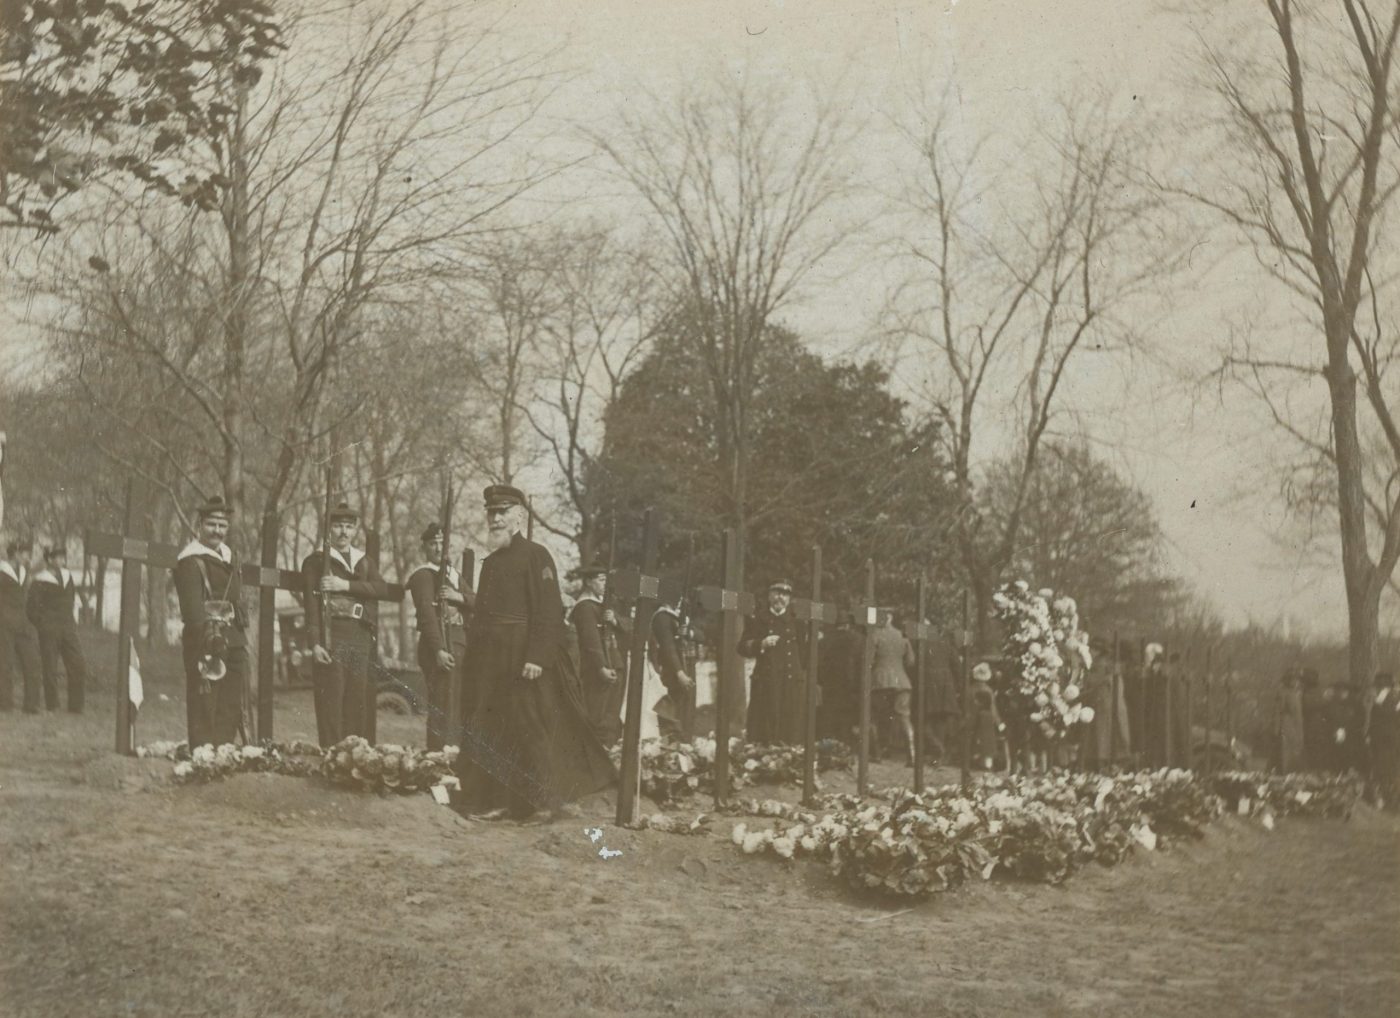 Photo dated November 4, 1918, showing the black wooden crosses at the gravesites of the French sailors. The dedication of the burial plot and the military mass for the deceased took place two days earlier. (National Archives)